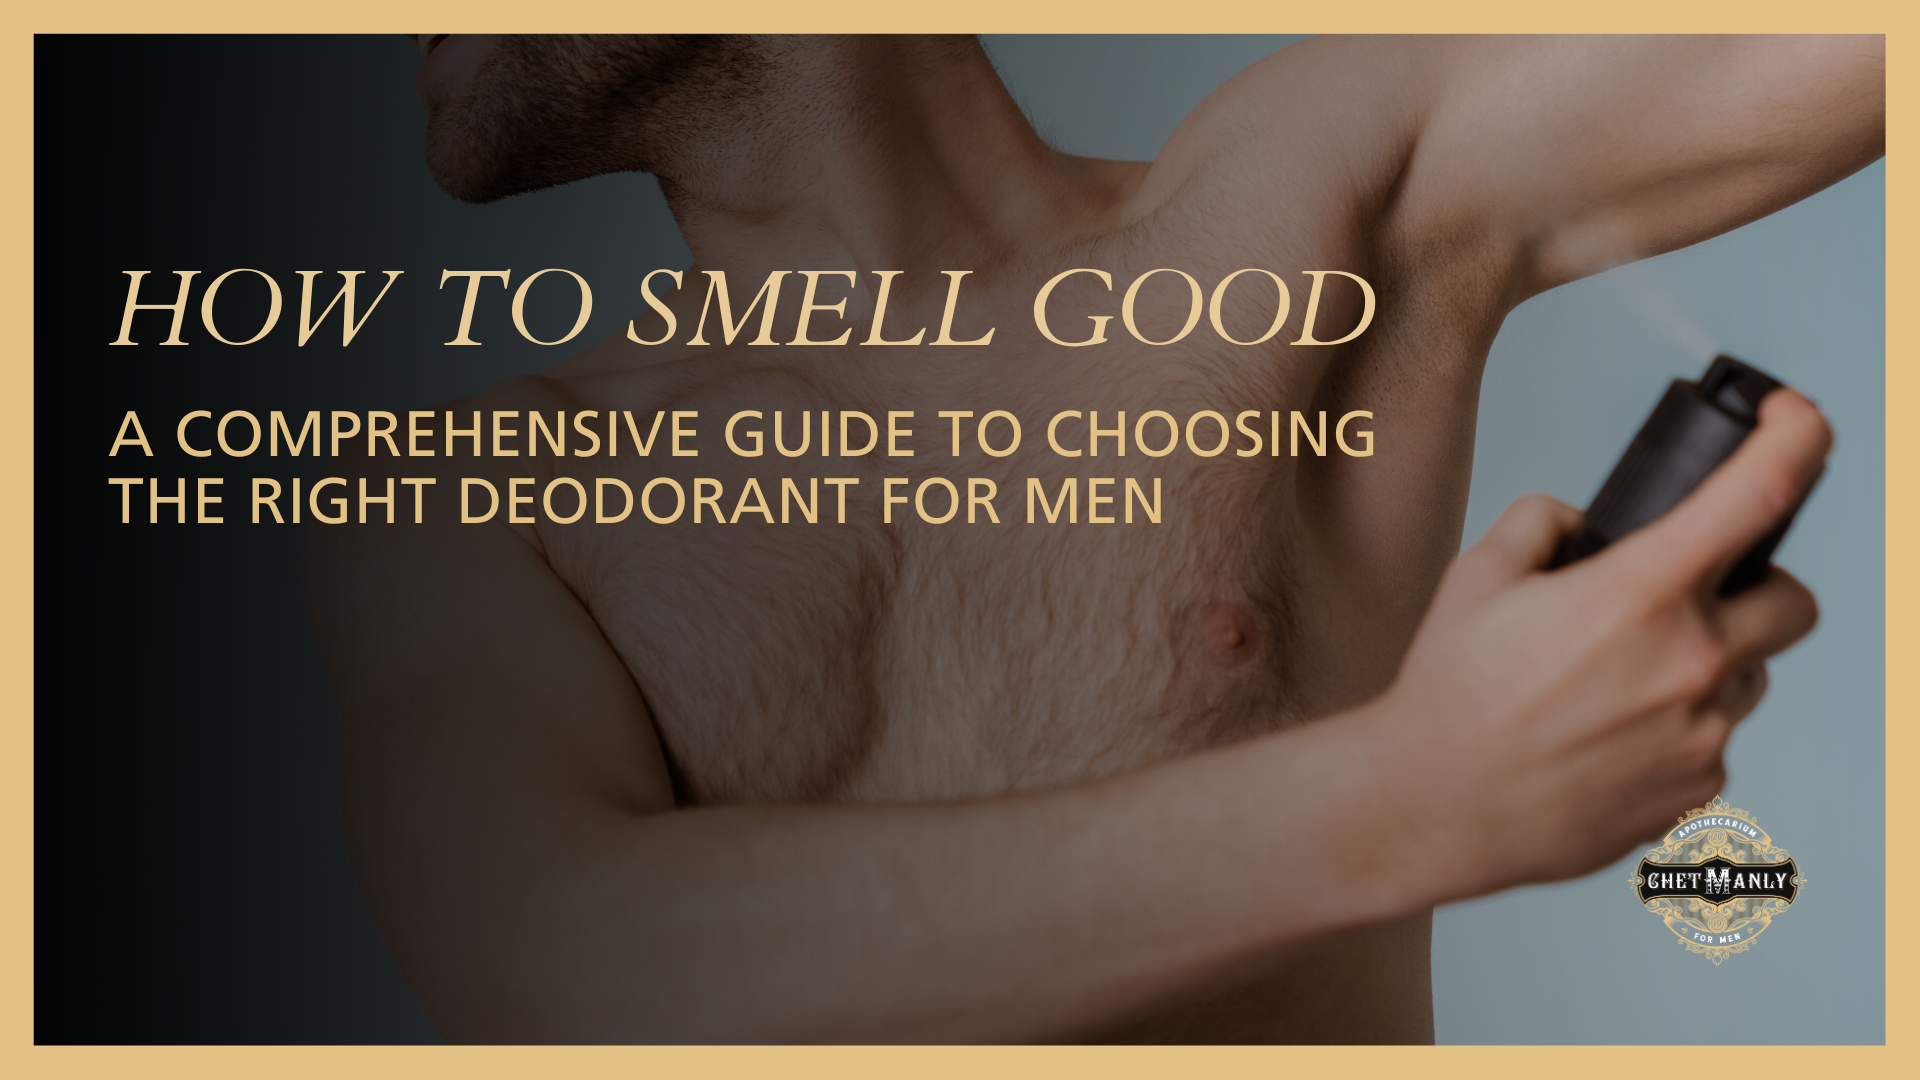 How to Smell Good: A Comprehensive Guide to Choosing the Right Deodorant for Men